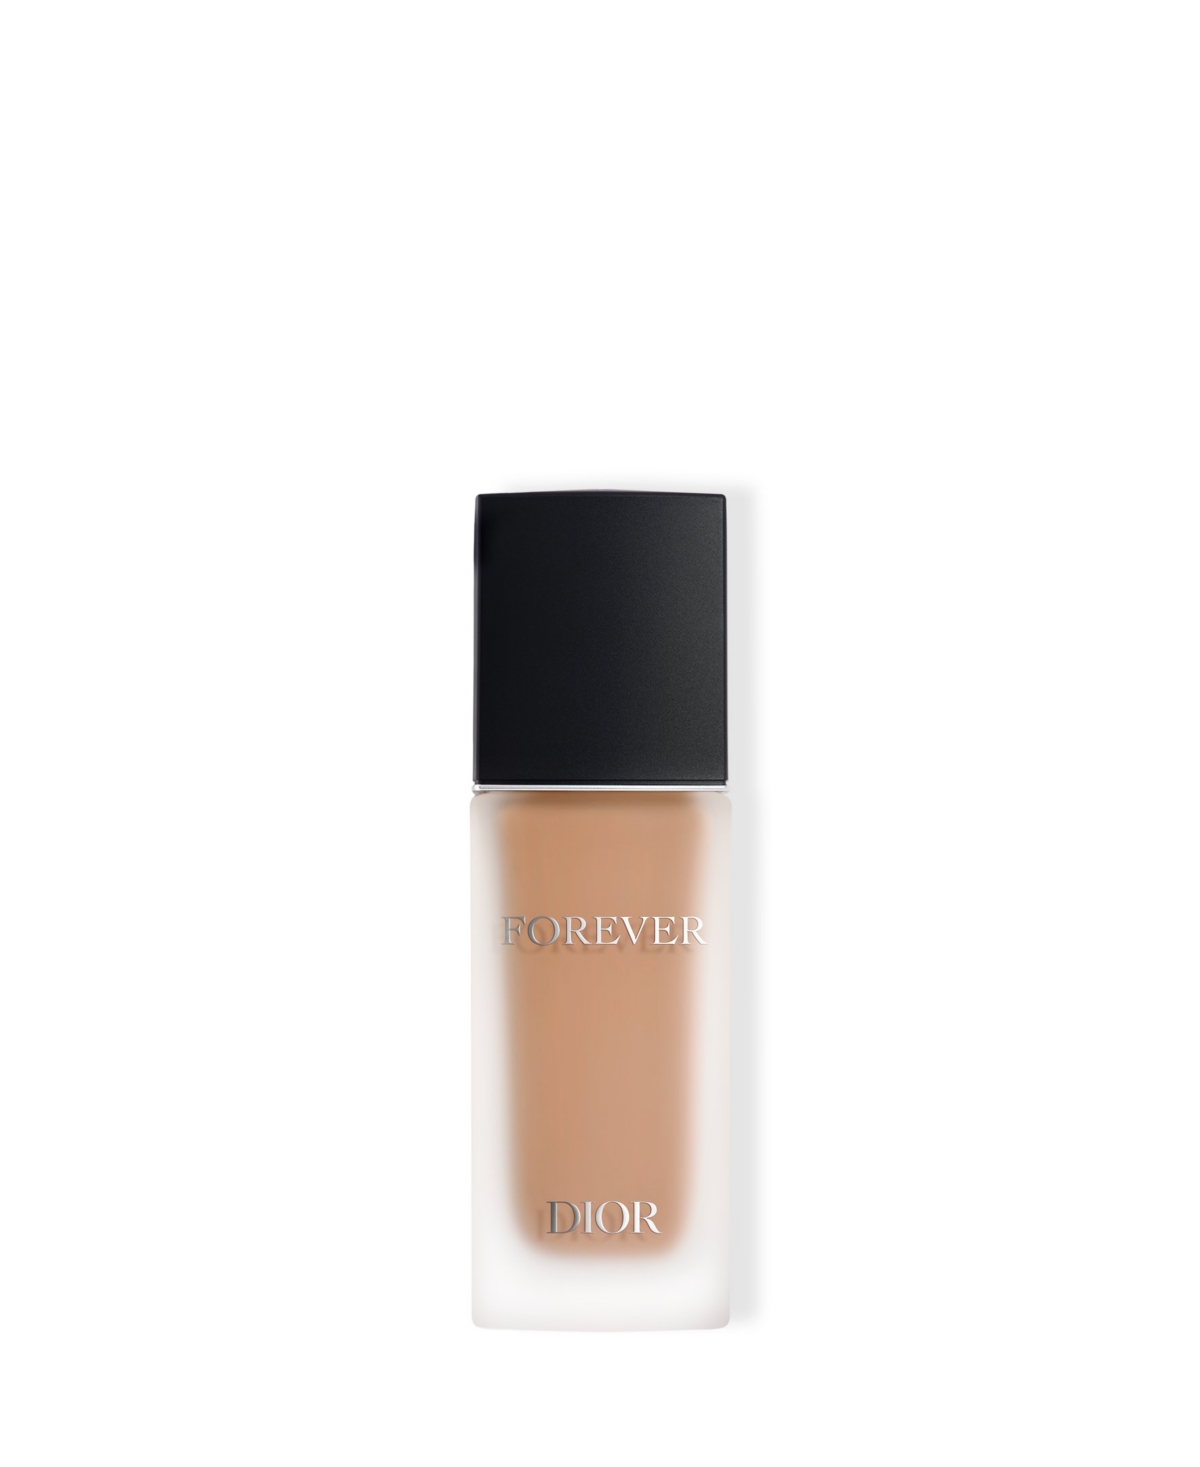 Dior Forever Matte Skincare Foundation Spf 15 In Cool (medium Skin With Cool Undertones)